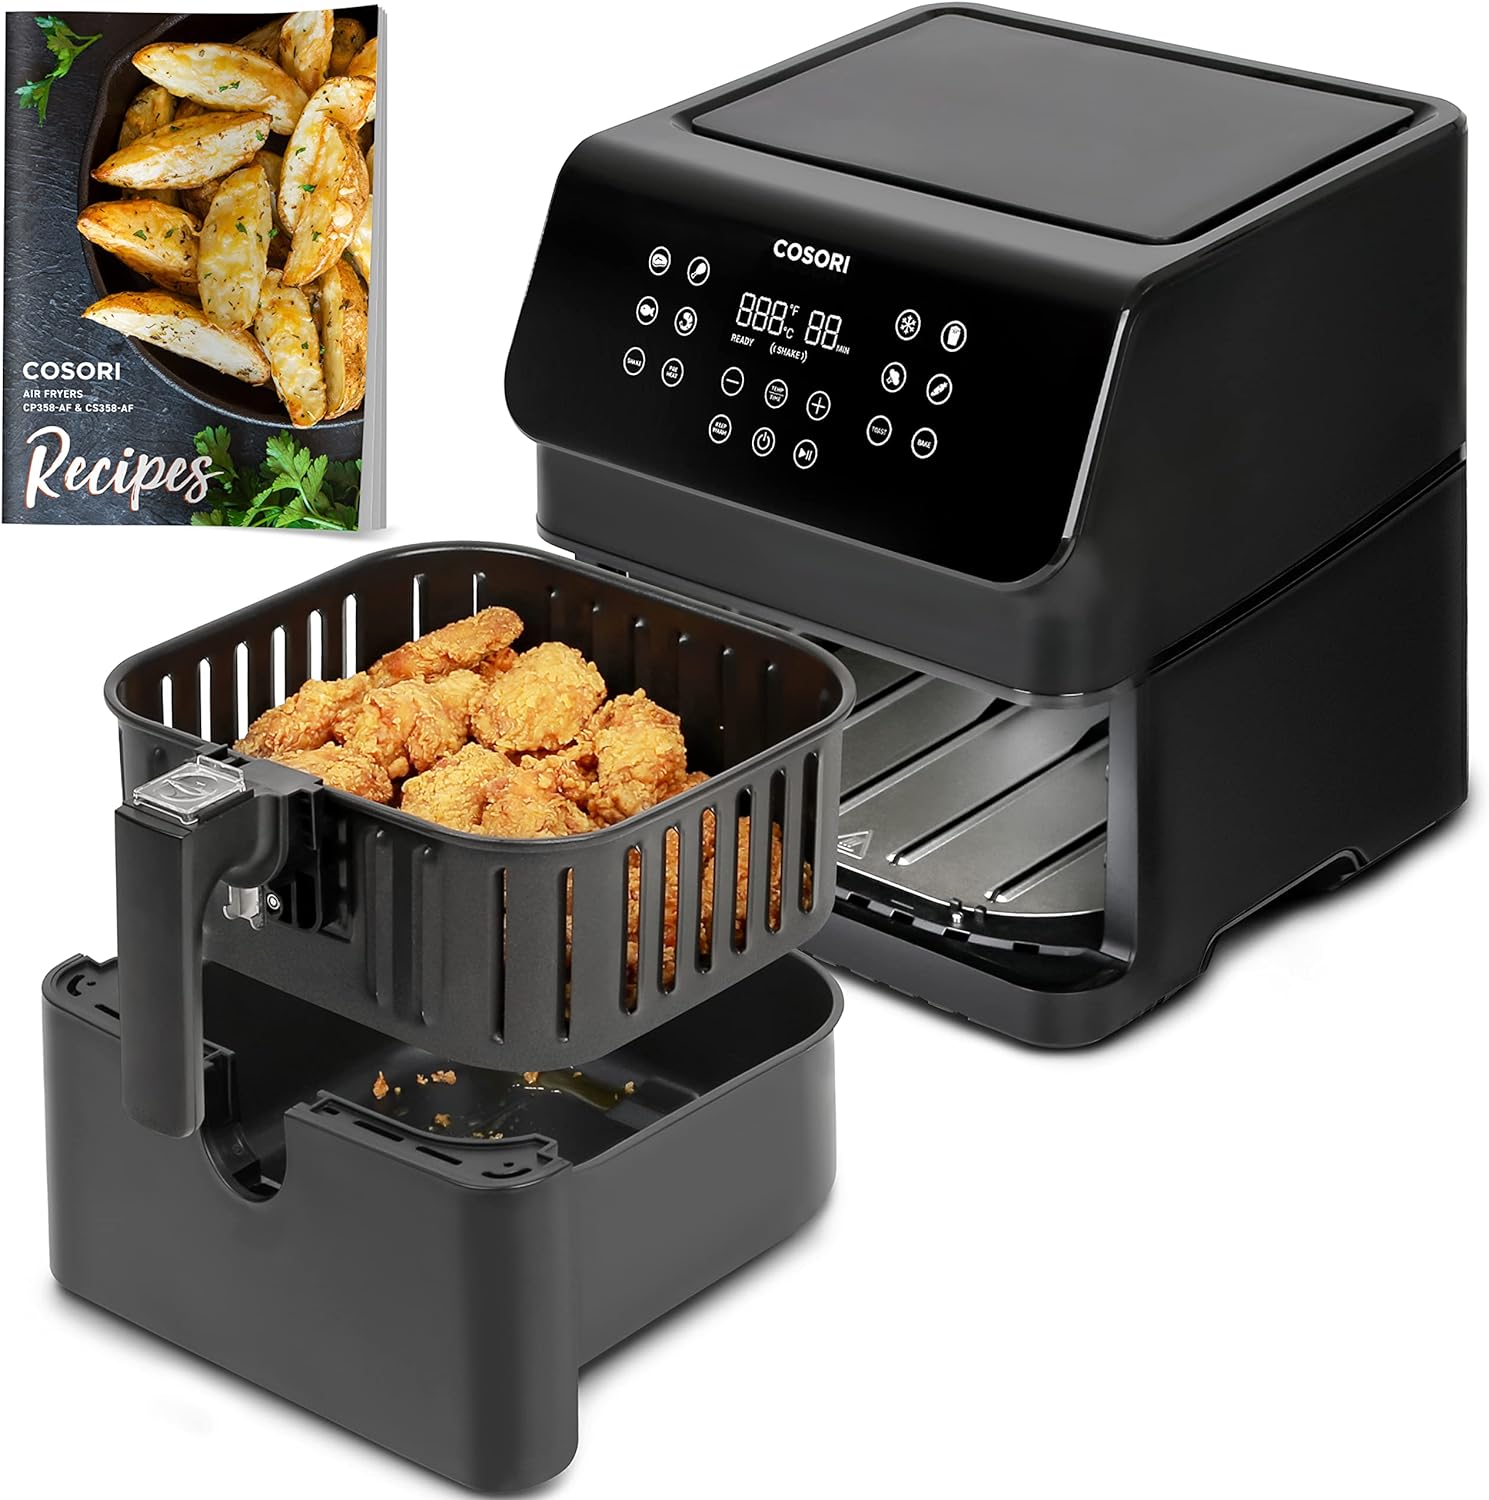 COSORI Pro II Air Fryer Oven Combo, 5.8QT Large Airfryer that Toast, Bake, 12-IN-1 Customizable Functions, Cookbook and Online Recipes, Nonstick  Detachable Square Basket, Dishwasher-Safe, Black